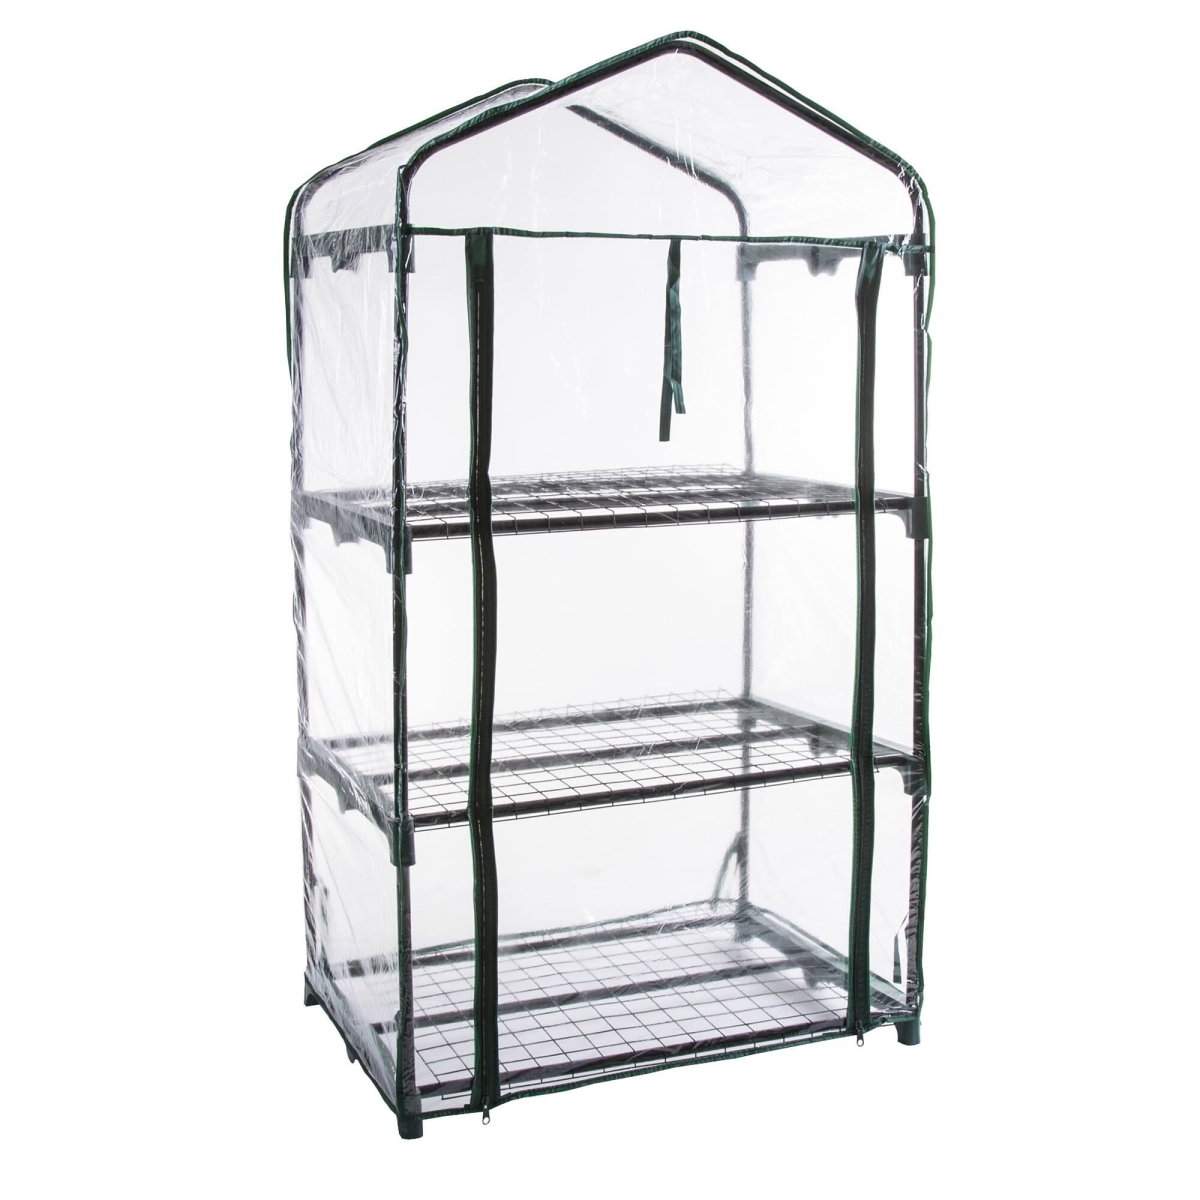 Gen-3pvc 3 Tier Portable Rolling Greenhouse With Clear Cover